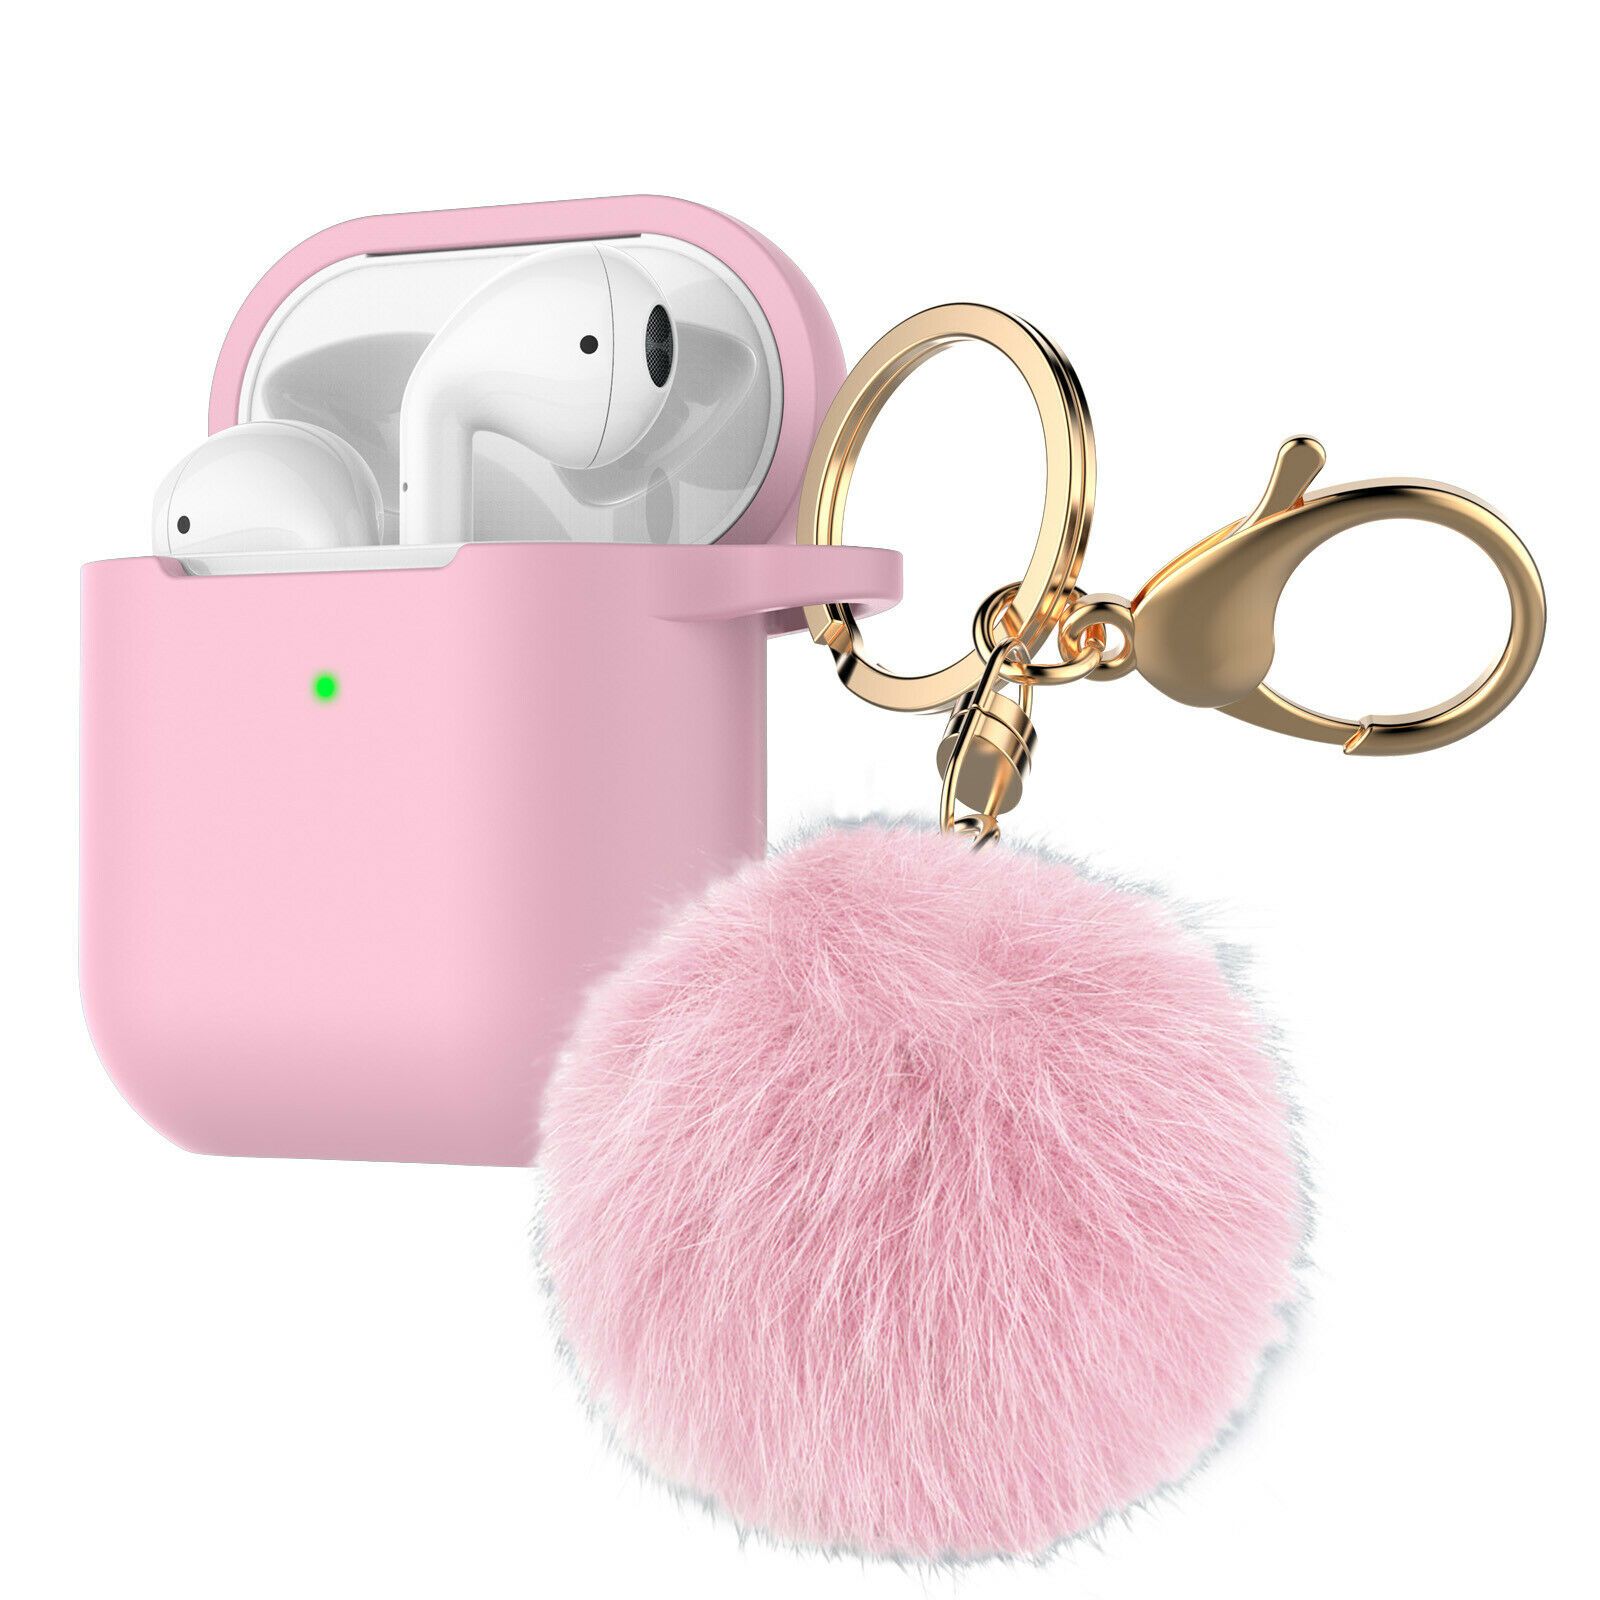 Airpods Silicone Charging Case Cover Fur Ball Keychain For Apple AirPods 1/2 Airpods Case hellotecusa Baby Pink 